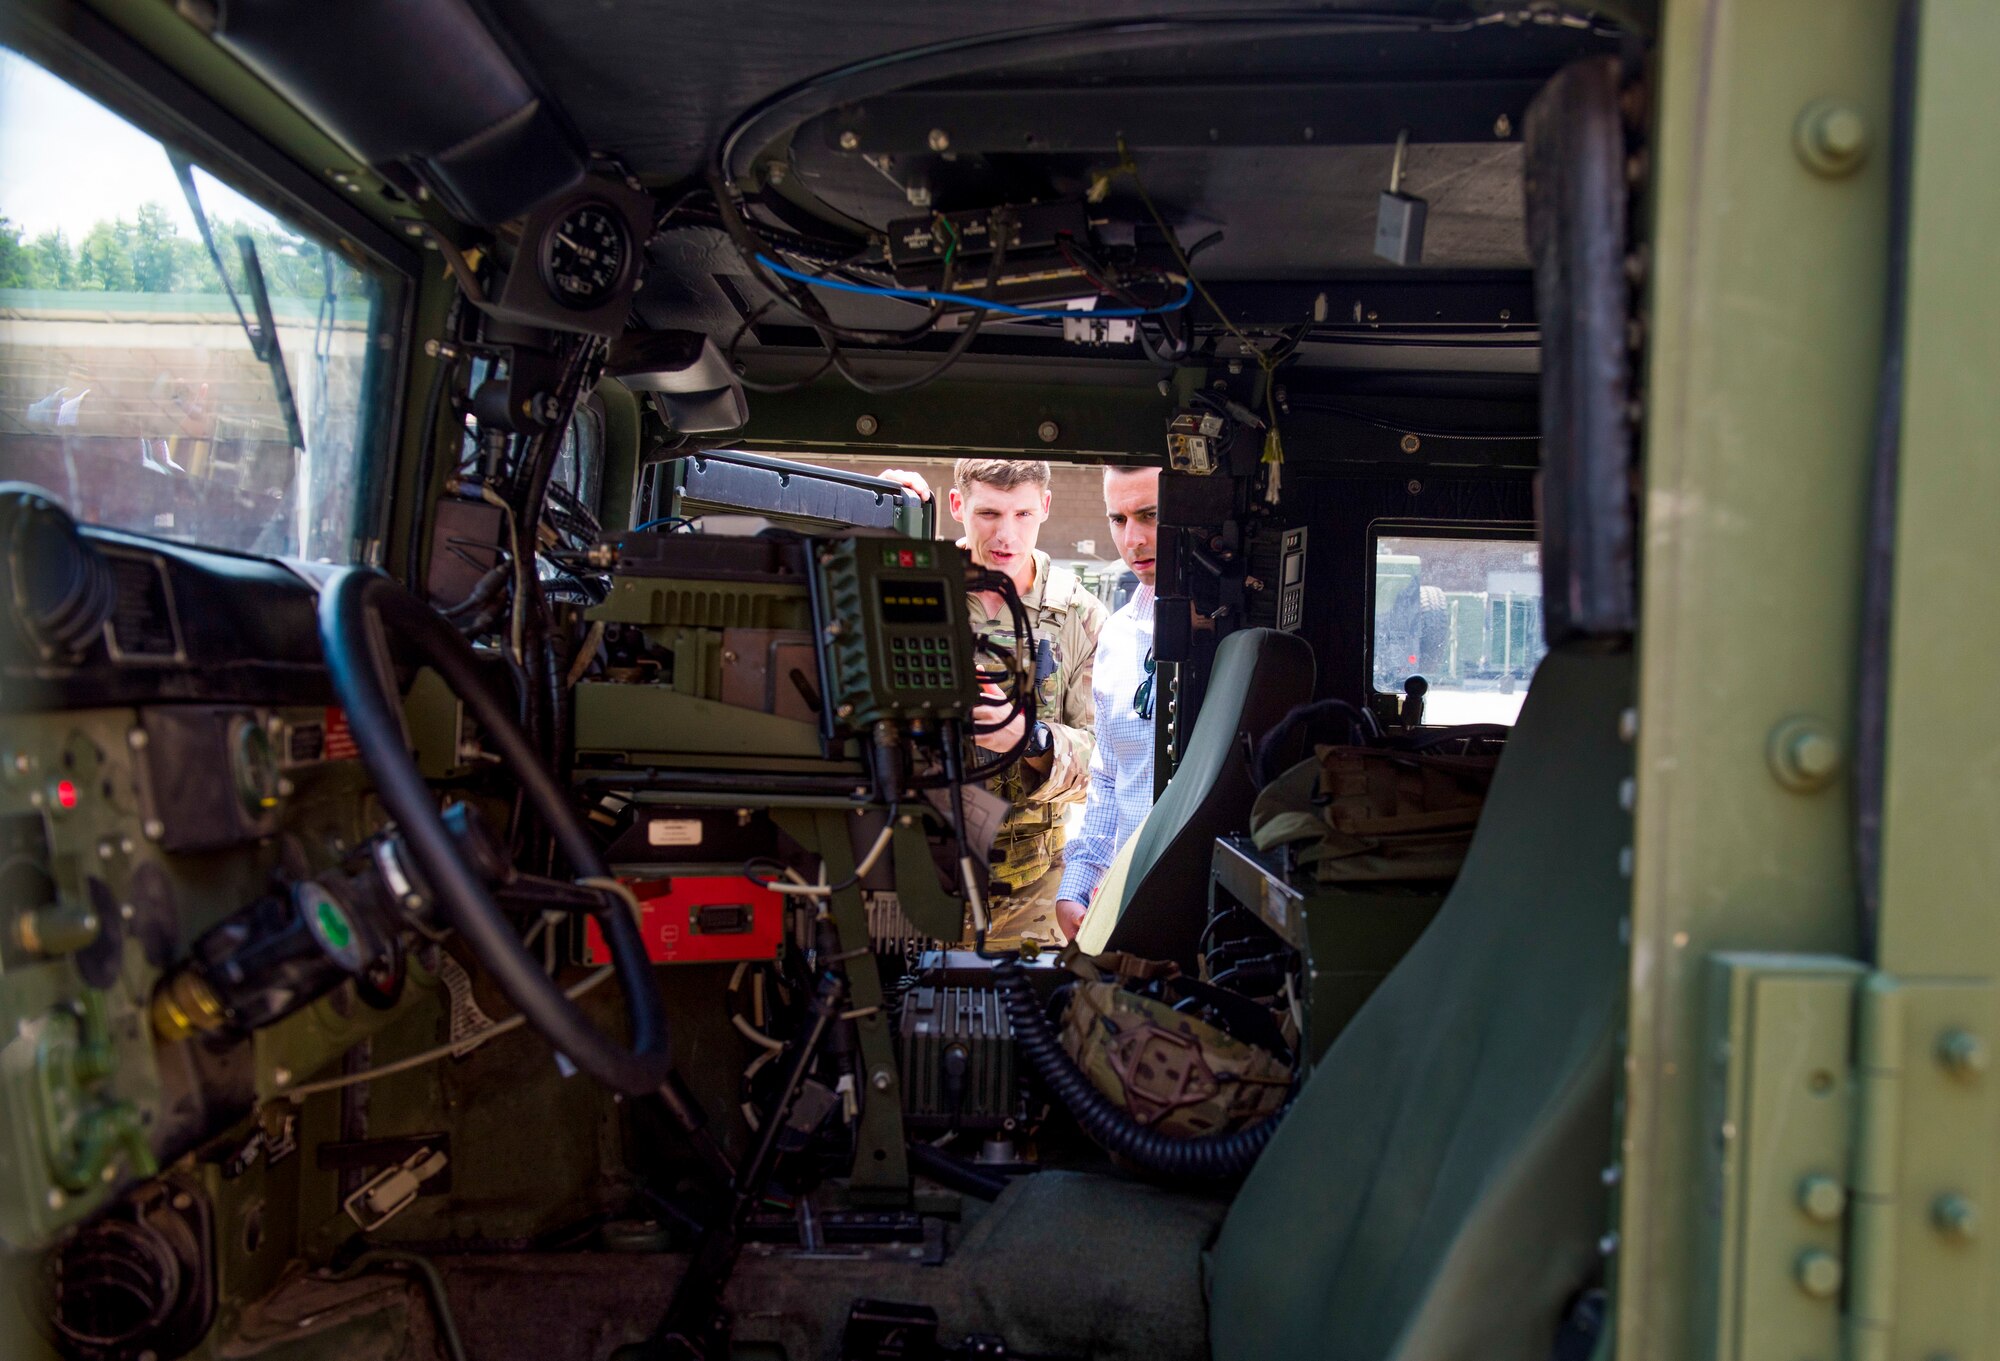 A U.S. Air Force joint terminal attack controller, assigned to the 165th Air Support Squadron, Georgia Air National Guard, performs a sound check while giving a presentation of their communication system installed in their Humvee called a Battlefield Airman System of Integrated Communications (BASIC) in Savannah, Ga. on August 13, 2019. The BASIC allows JTAC airmen to establish communications on multiple frequencies including HF, UHF, VHF, FM and SATCOM radios all while being protected from harsh conditions in an armored vehicle following a natural disaster. (U.S. Air National Guard photo by Staff Sgt. Caila Arahood)